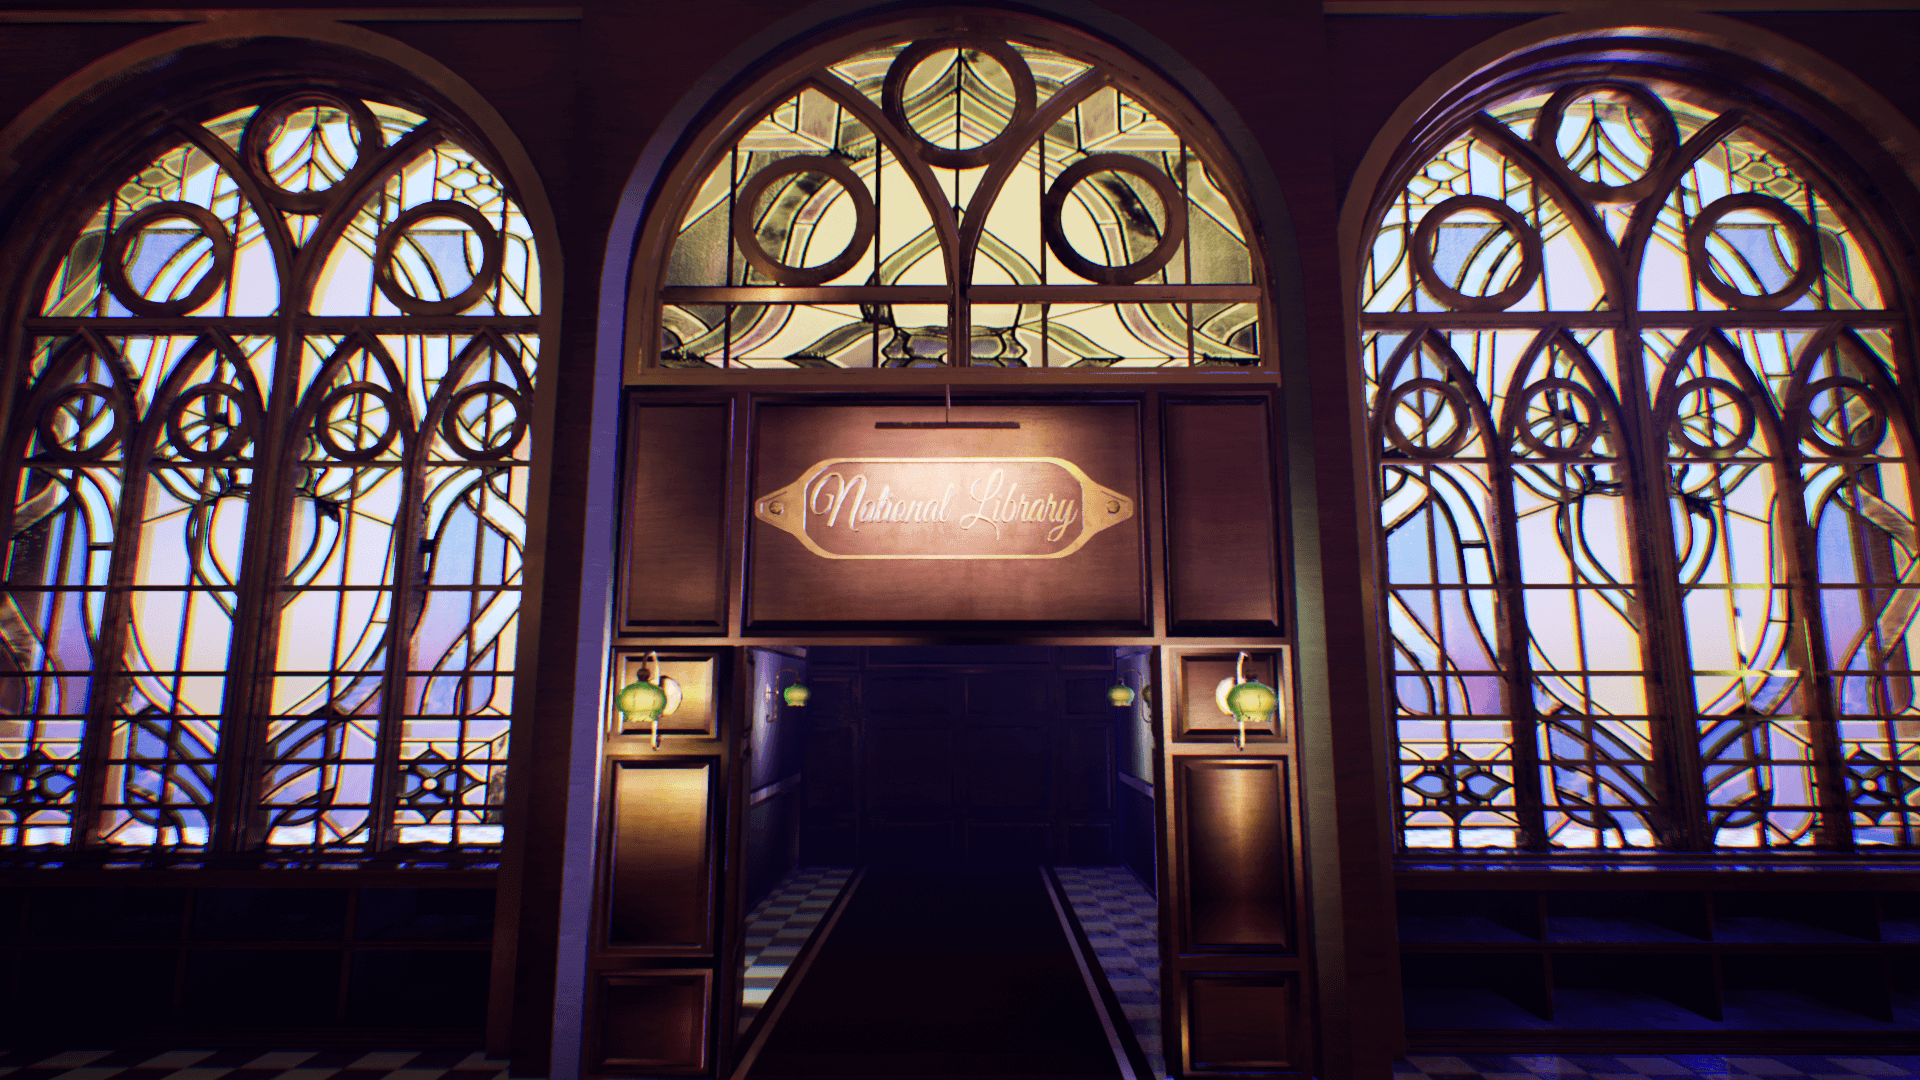 An image showing National Library asset pack, created with Unreal Engine.